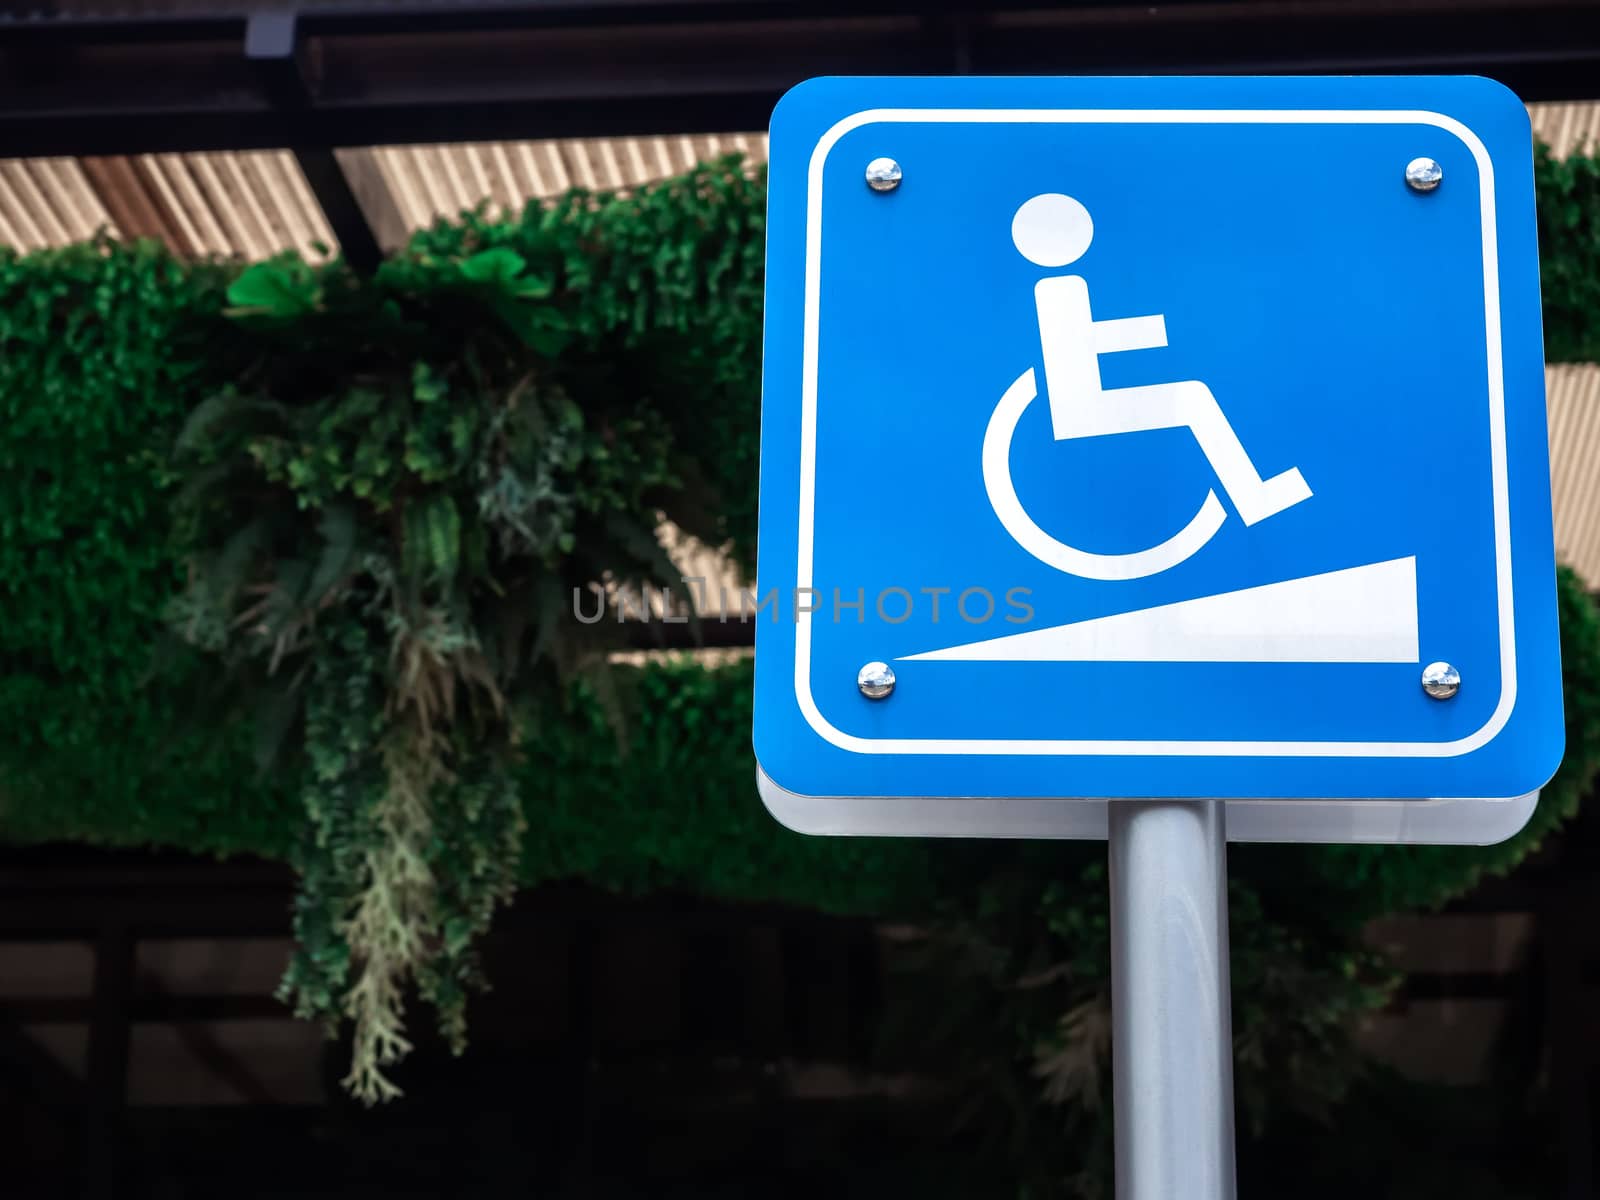 Disabled way sign wth copy space. Wheelchair symbol on blue sign disabled sign for support wheelchair disabled people.